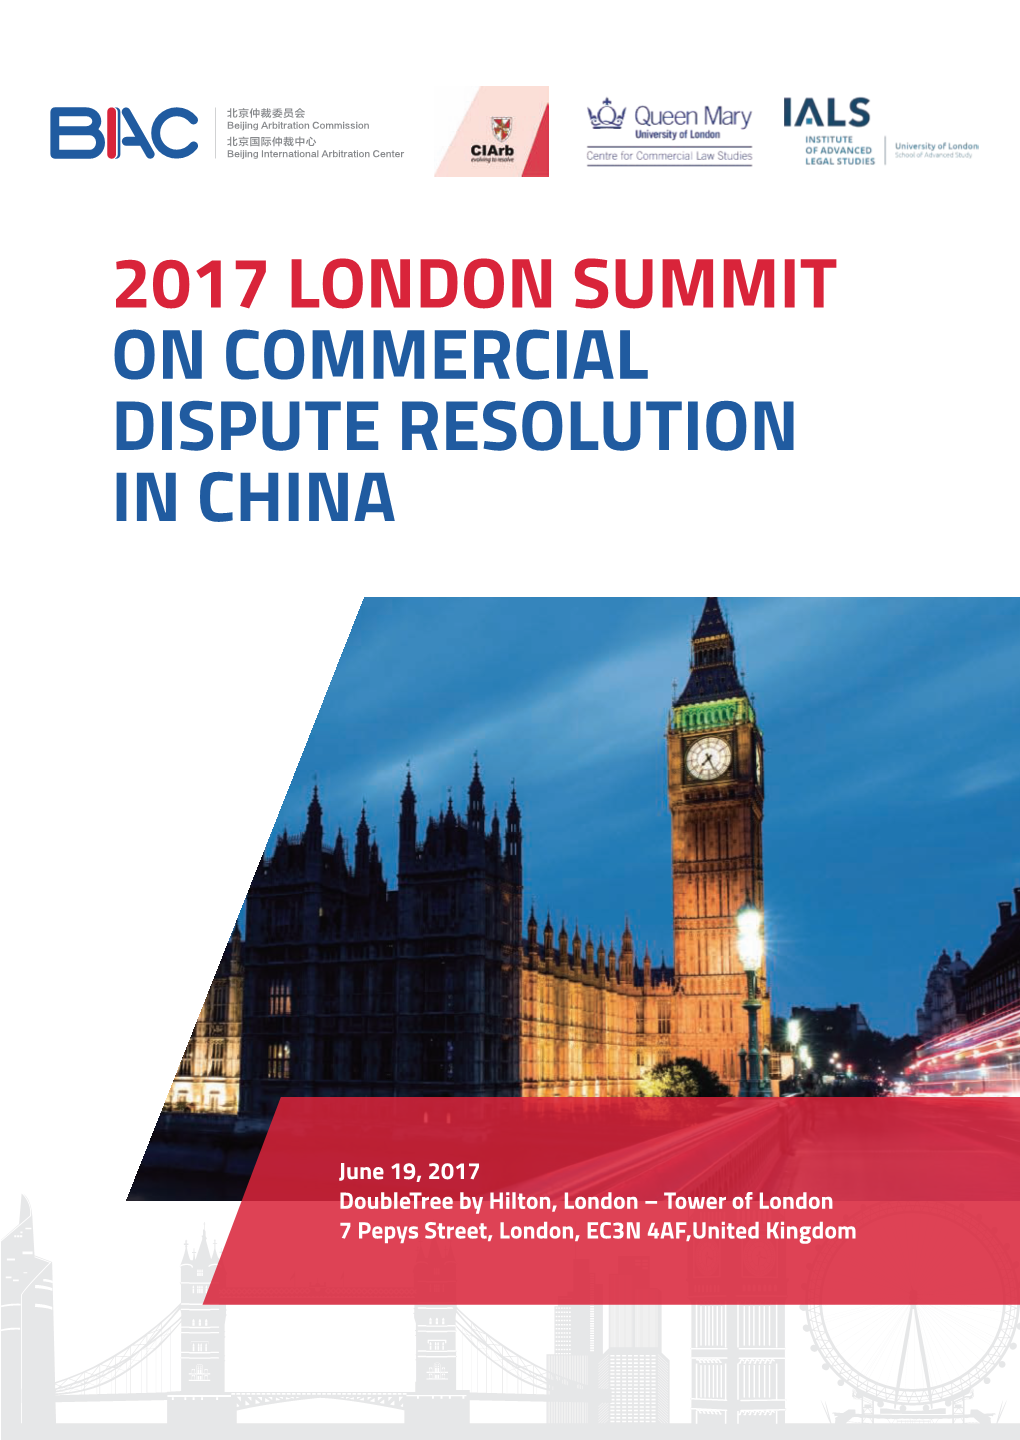 2017 London Summit on Commercial Dispute Resolution in China